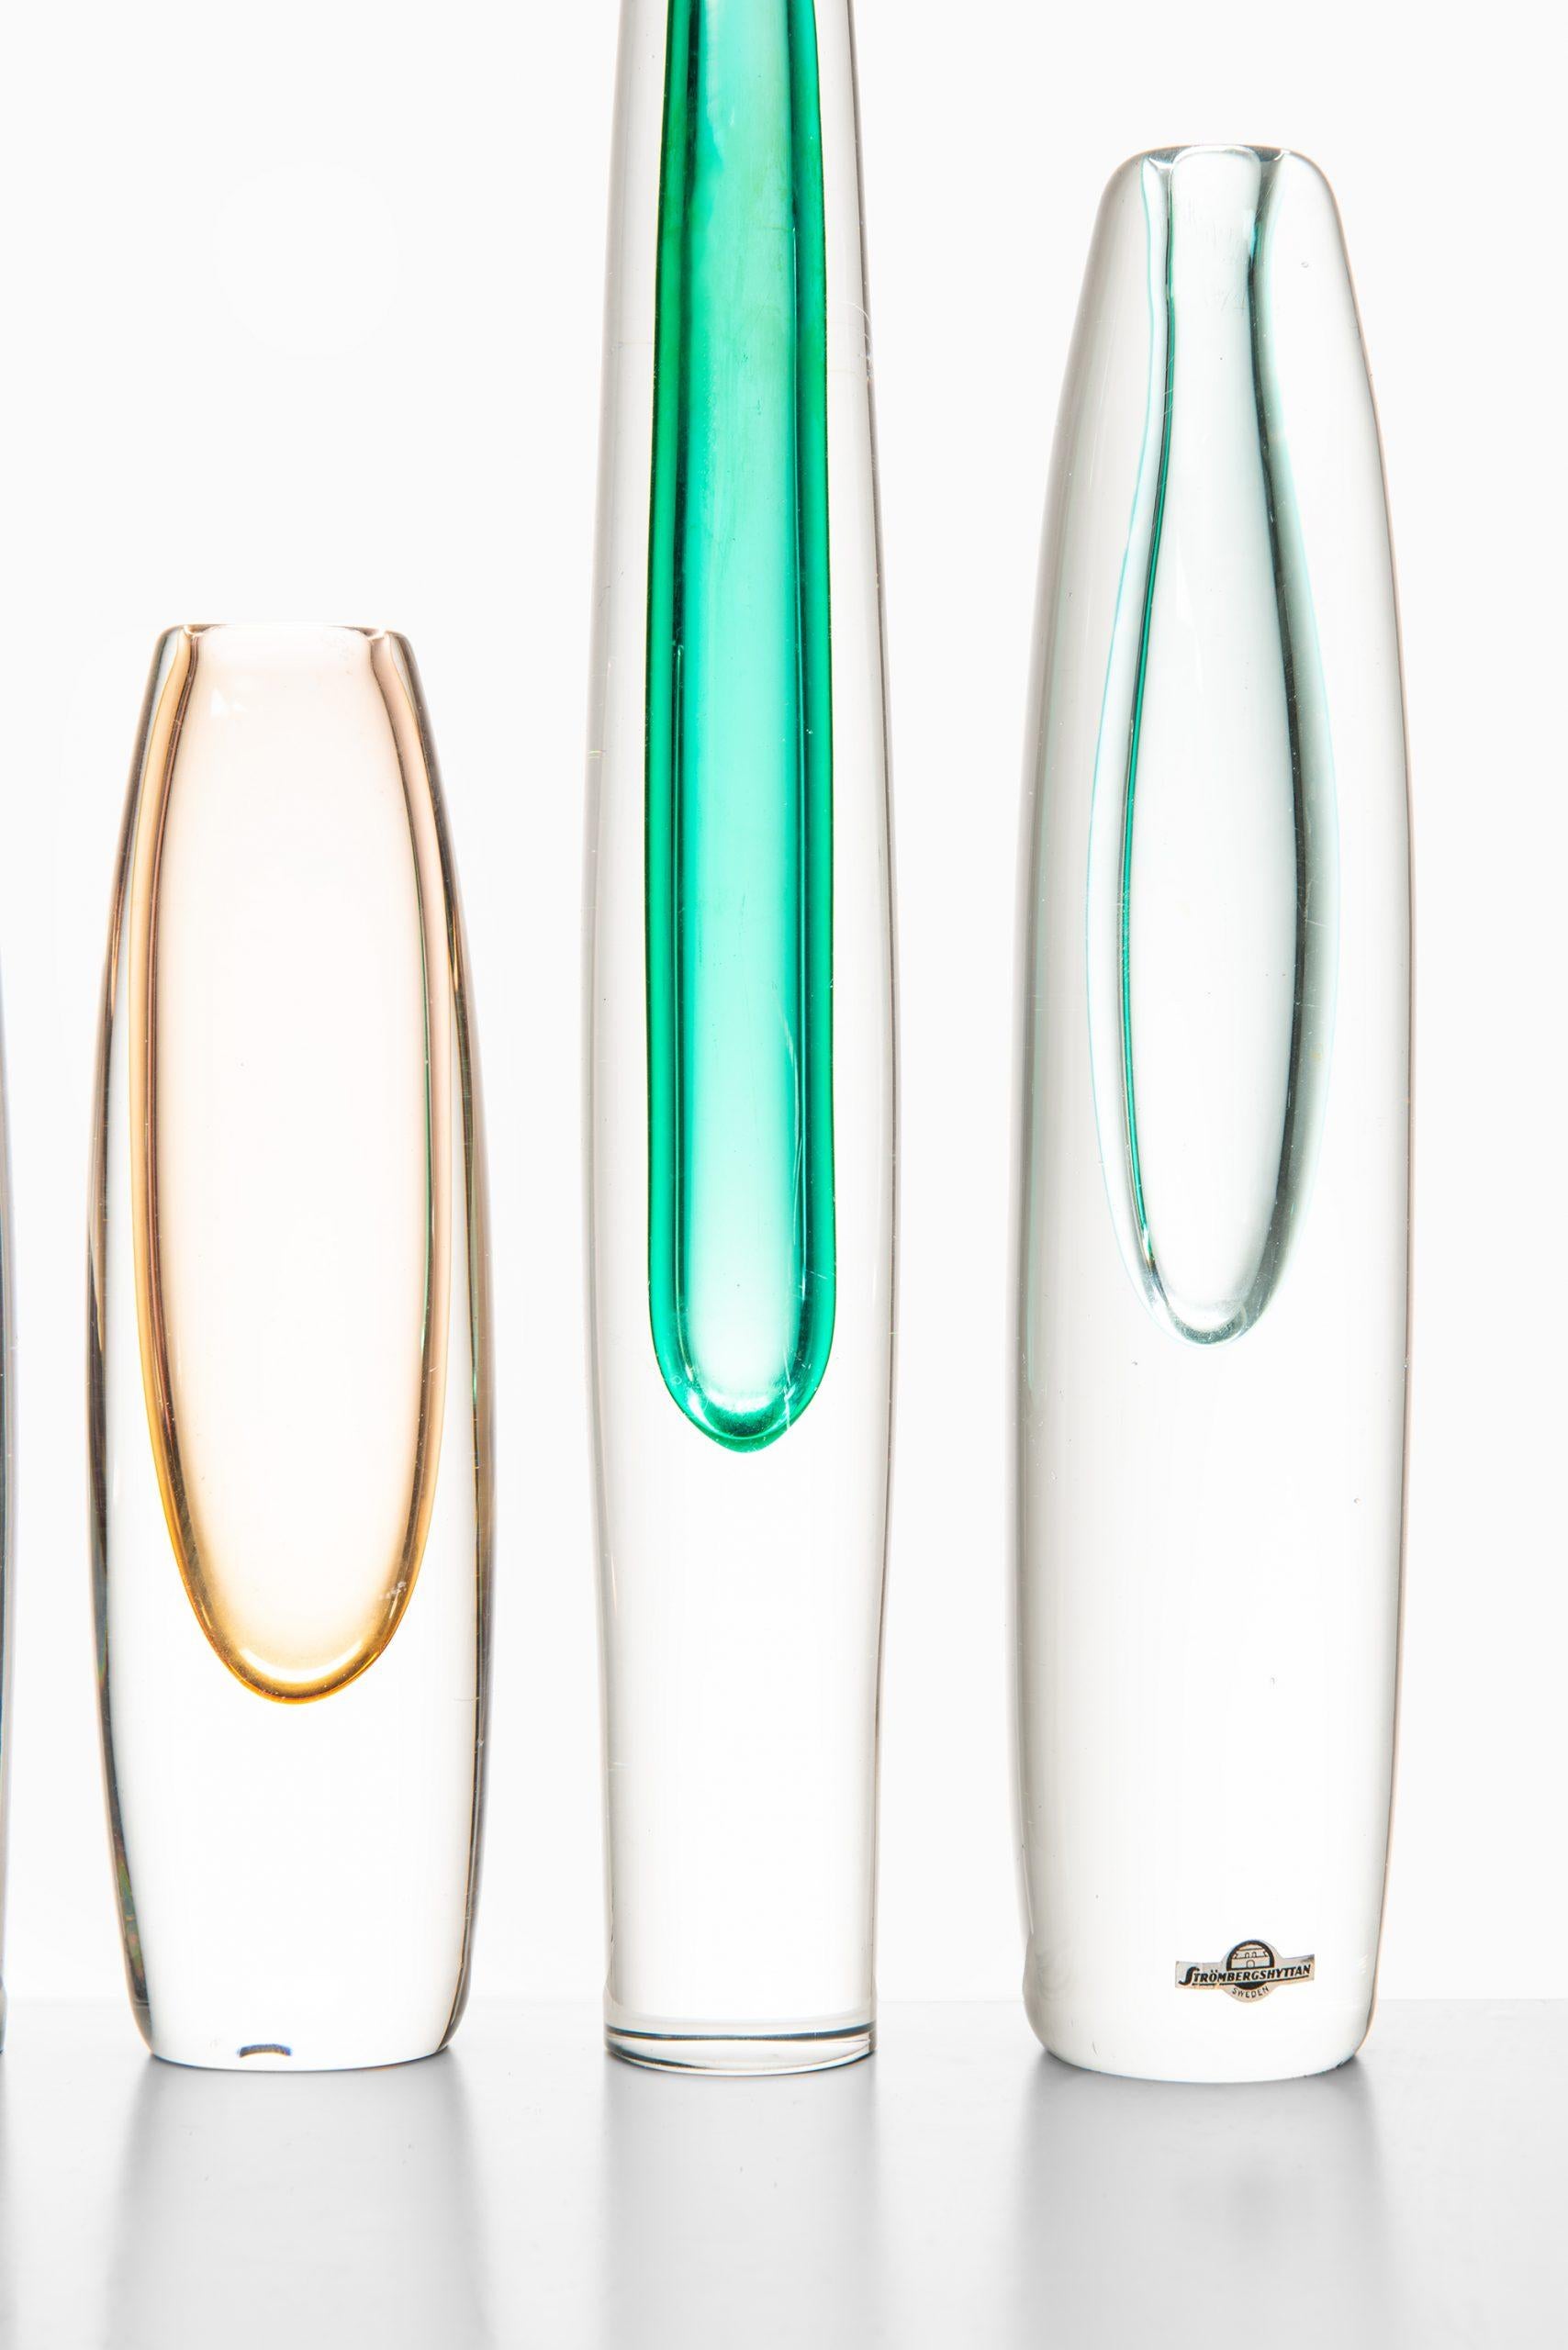 A set of 7 glass vases designed by Gunnar Nylund. Produced by Strömbergshyttan in Sweden.
Dimensions for the highest (W x D x H): 5 x 5 x 36 cm.